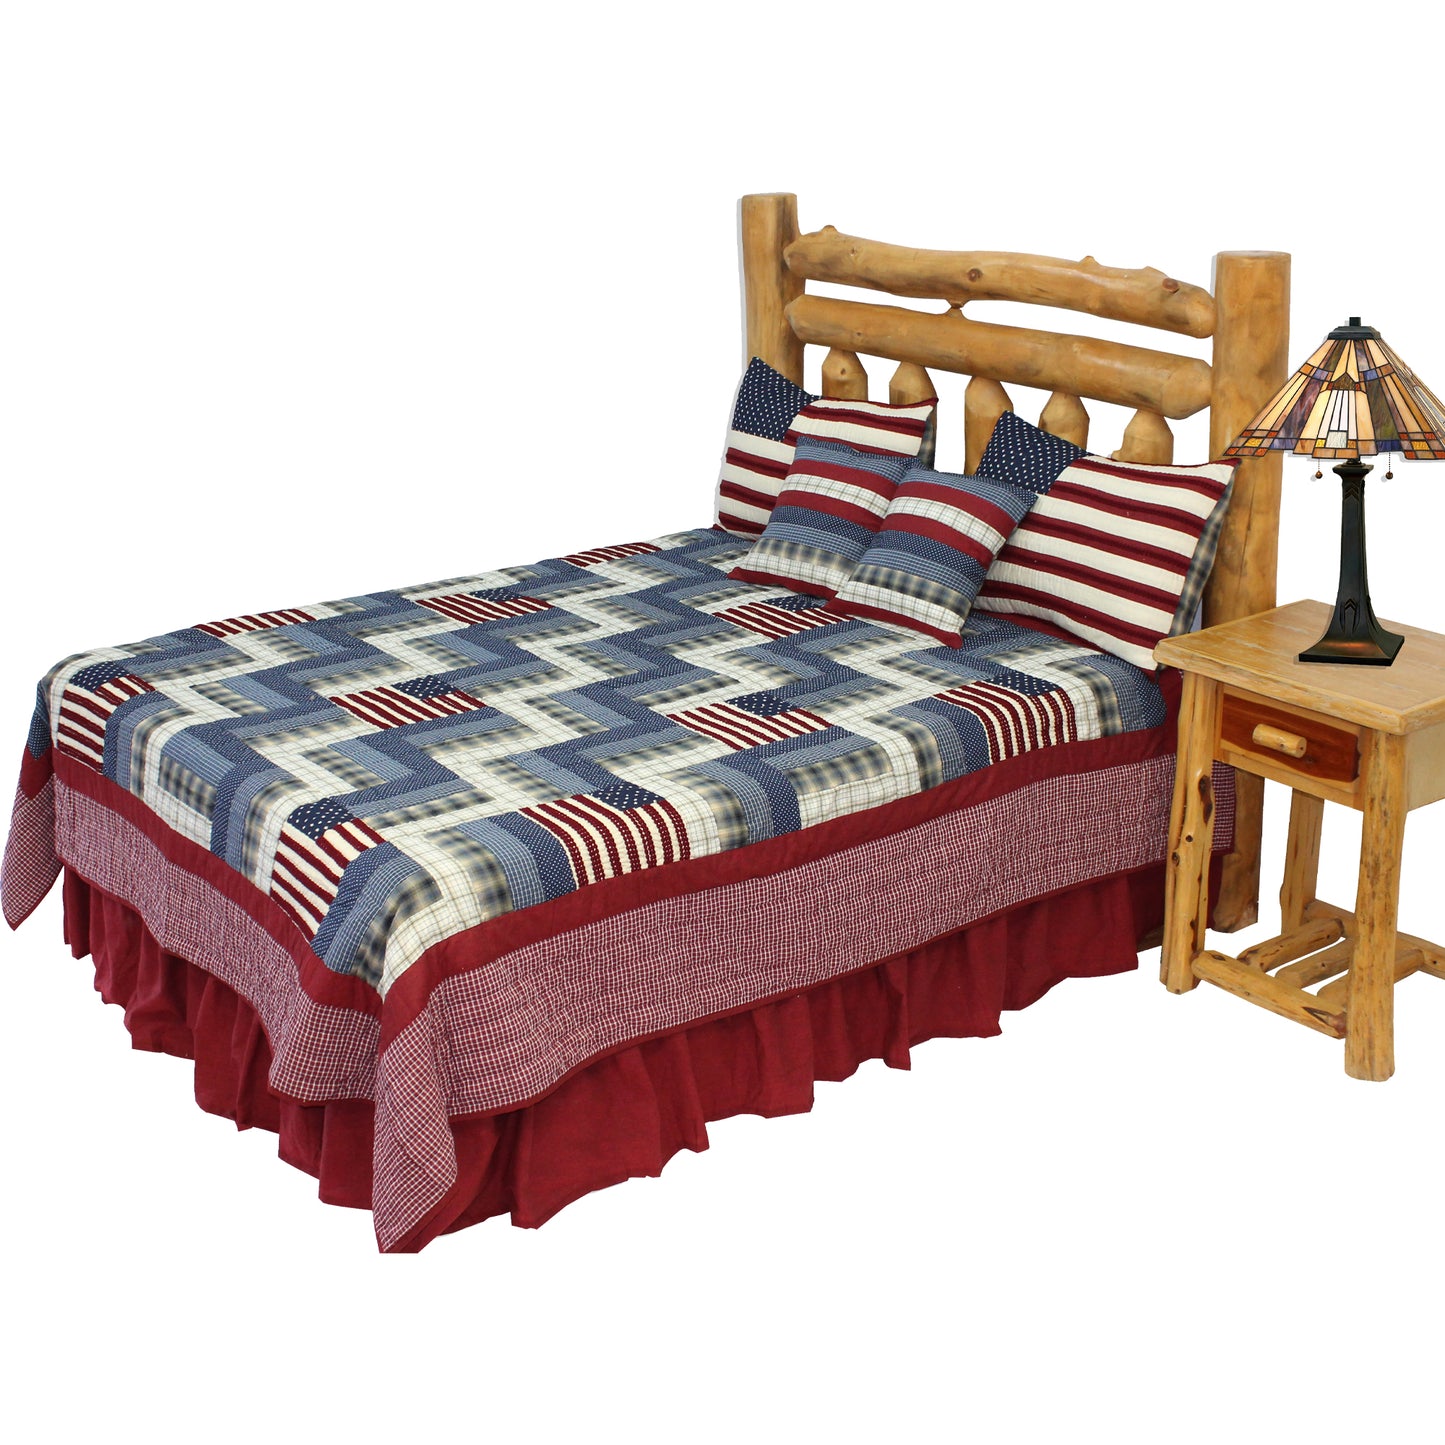 Glory and Honour Quilt, buy a Quilt get free shams and toss pillow worth of $98